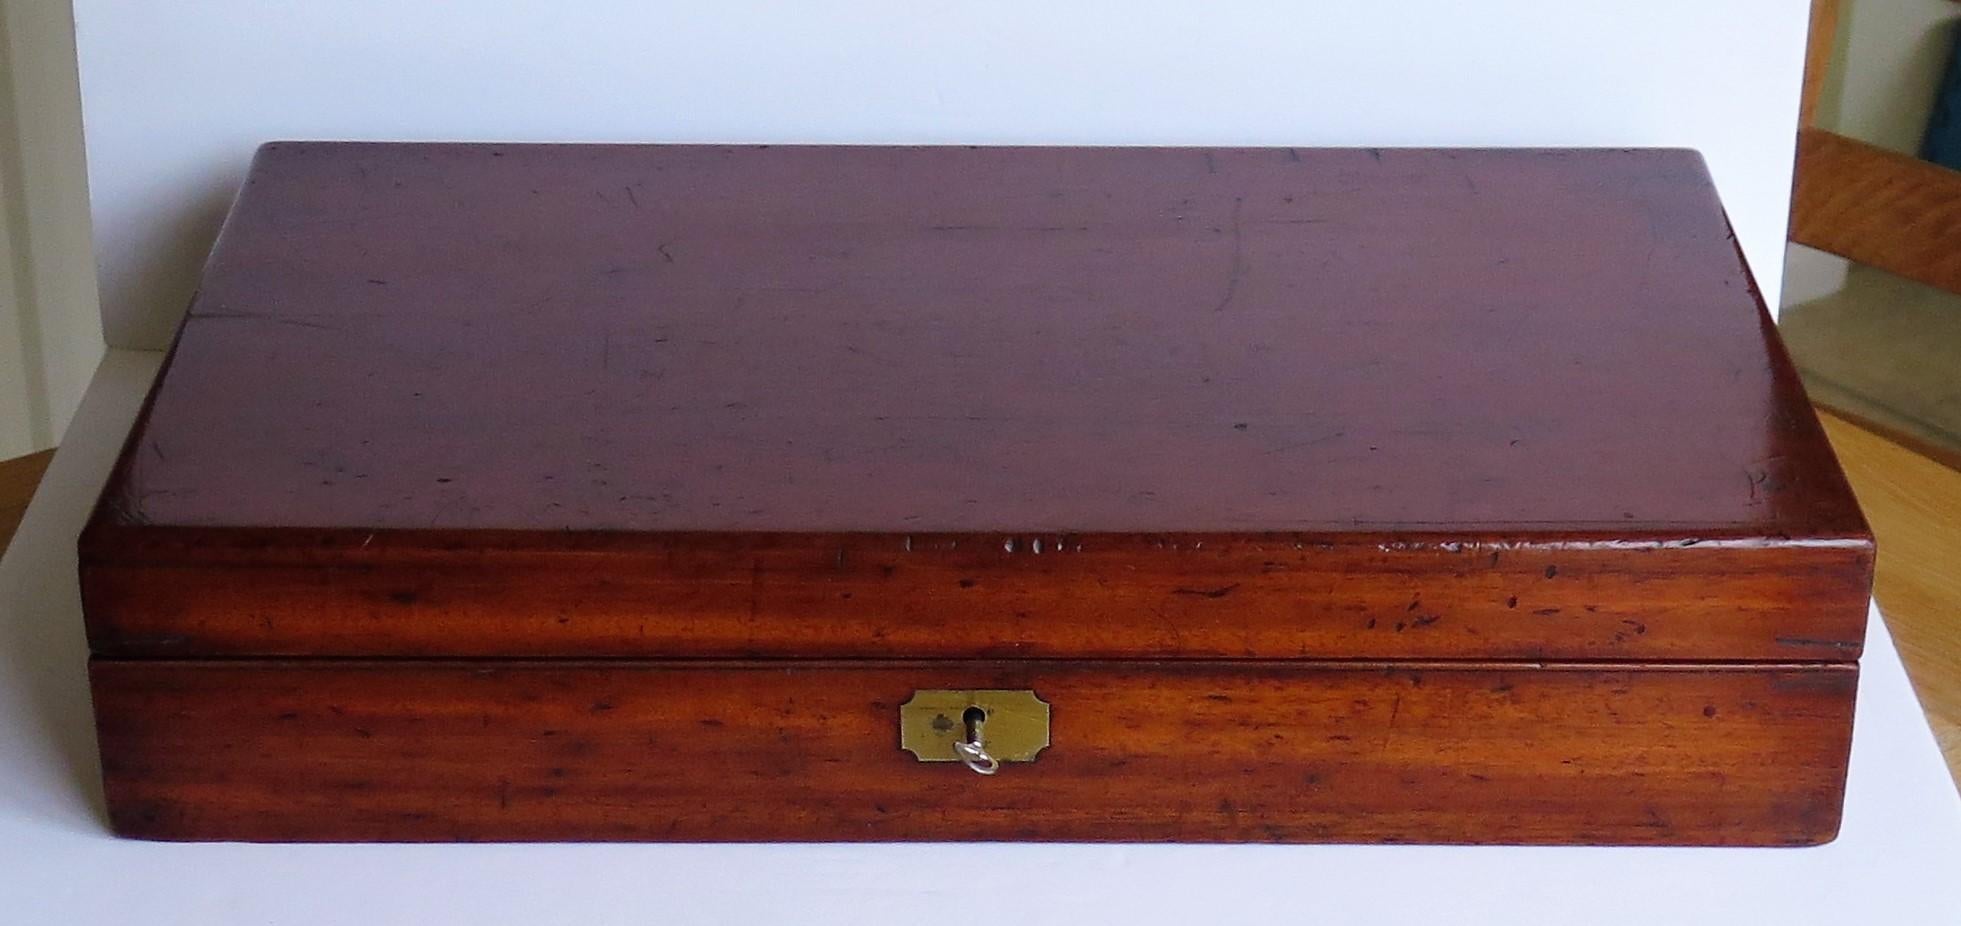 Victorian 19th Century Complete Games Compendium in Hardwood Jointed Box over 10 Games